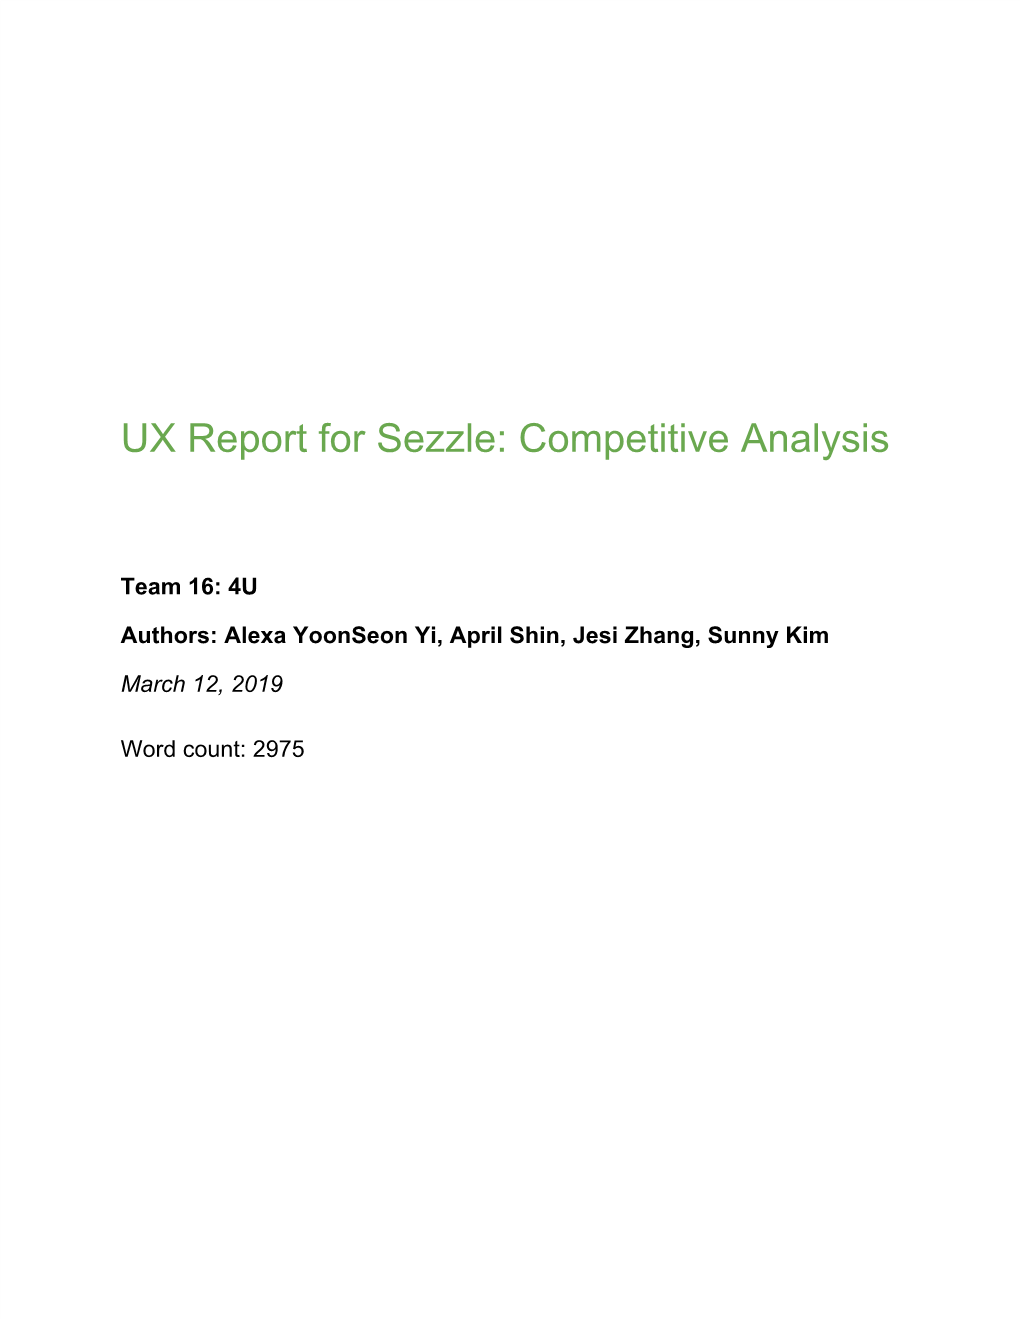 UX Report for Sezzle: Competitive Analysis